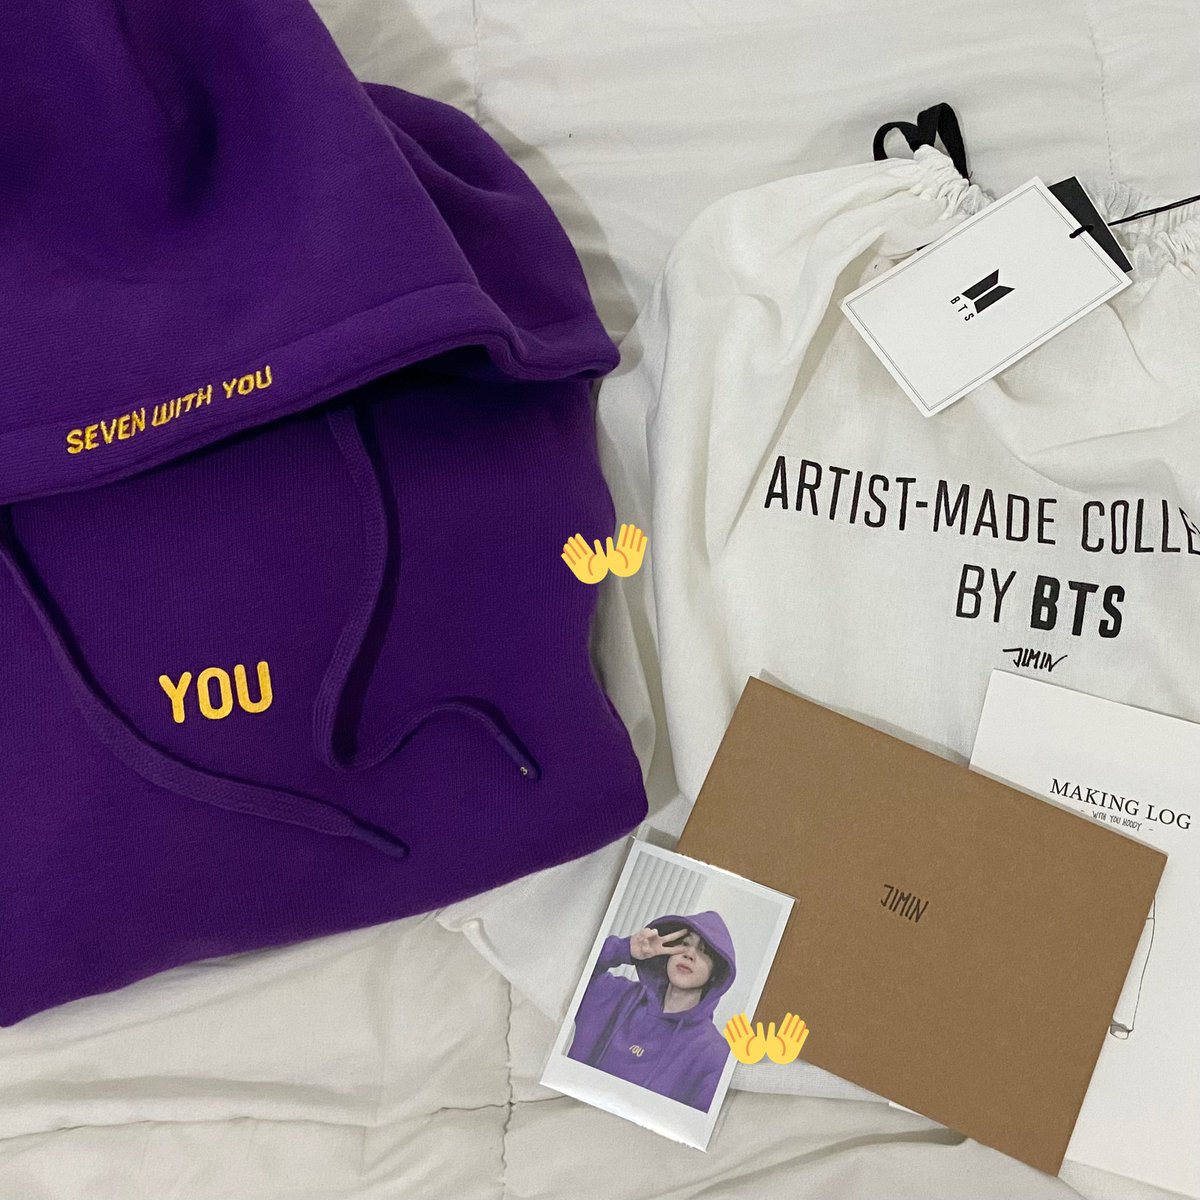 thank you so much @KsplurgePH for securing my jimin with you hoody ++ for the vv smooth transaction! 🥺🤍 #KSplurgePHFeedback